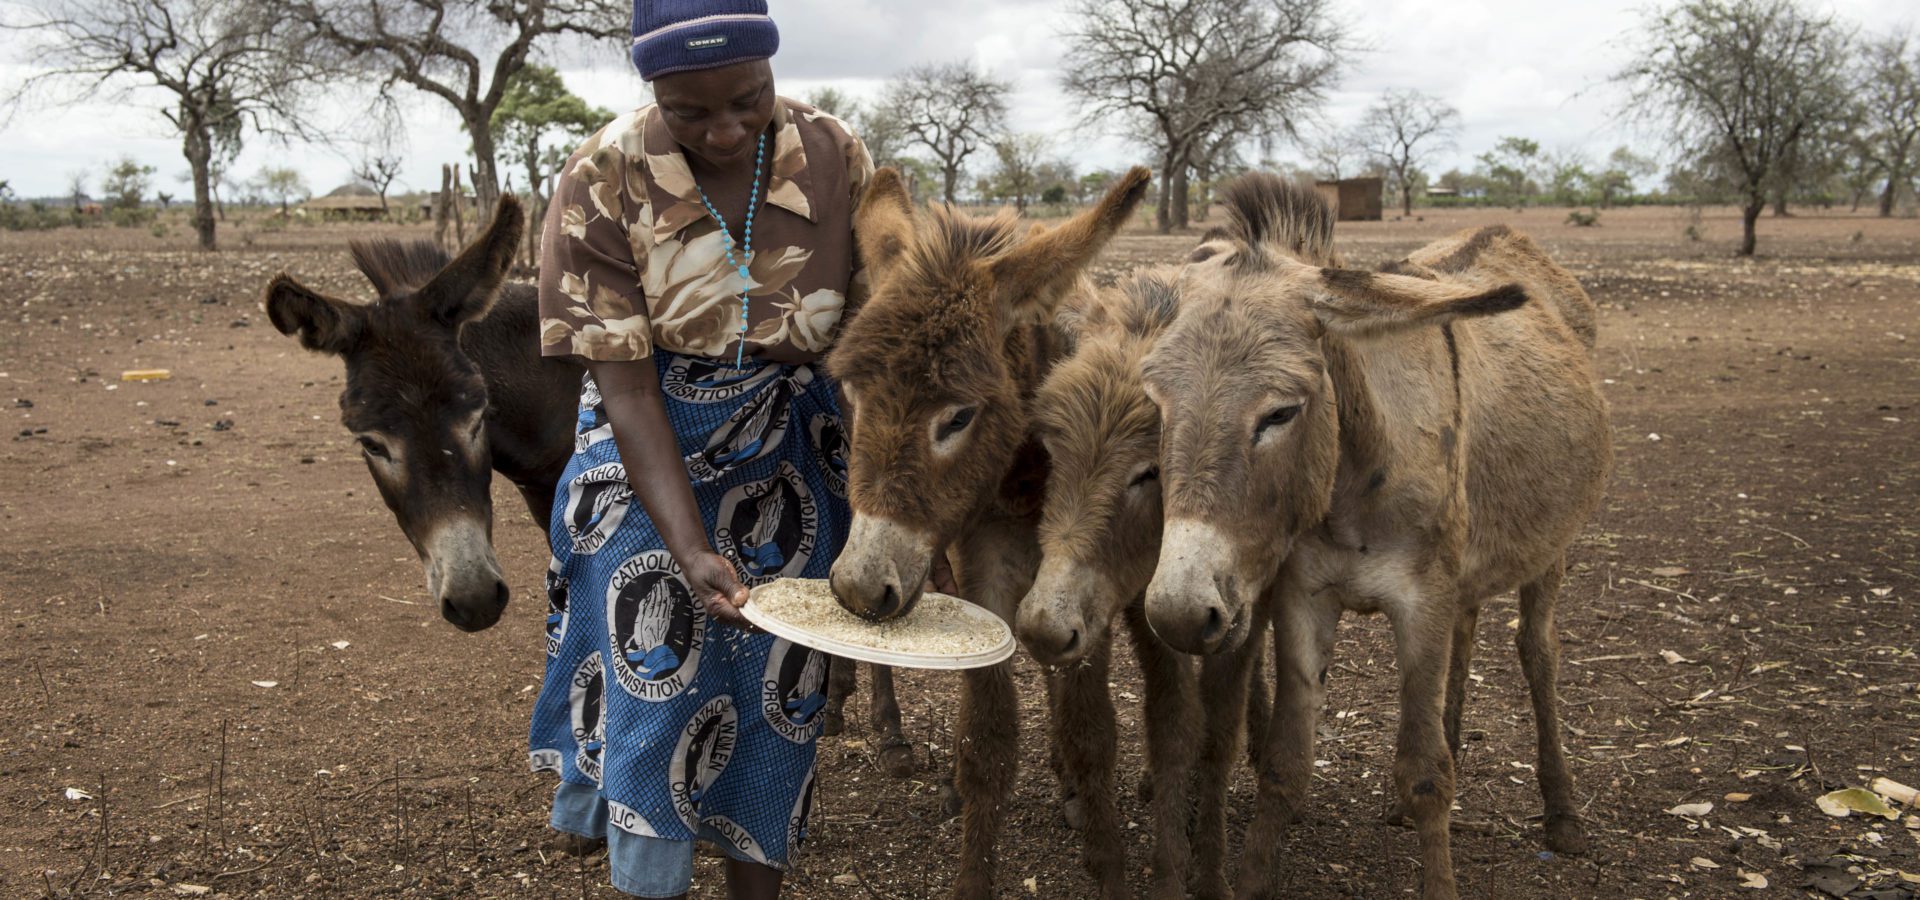 A lady dressed in a blouse, skirt and hat holds out a large plate of donkey food for four donkeys